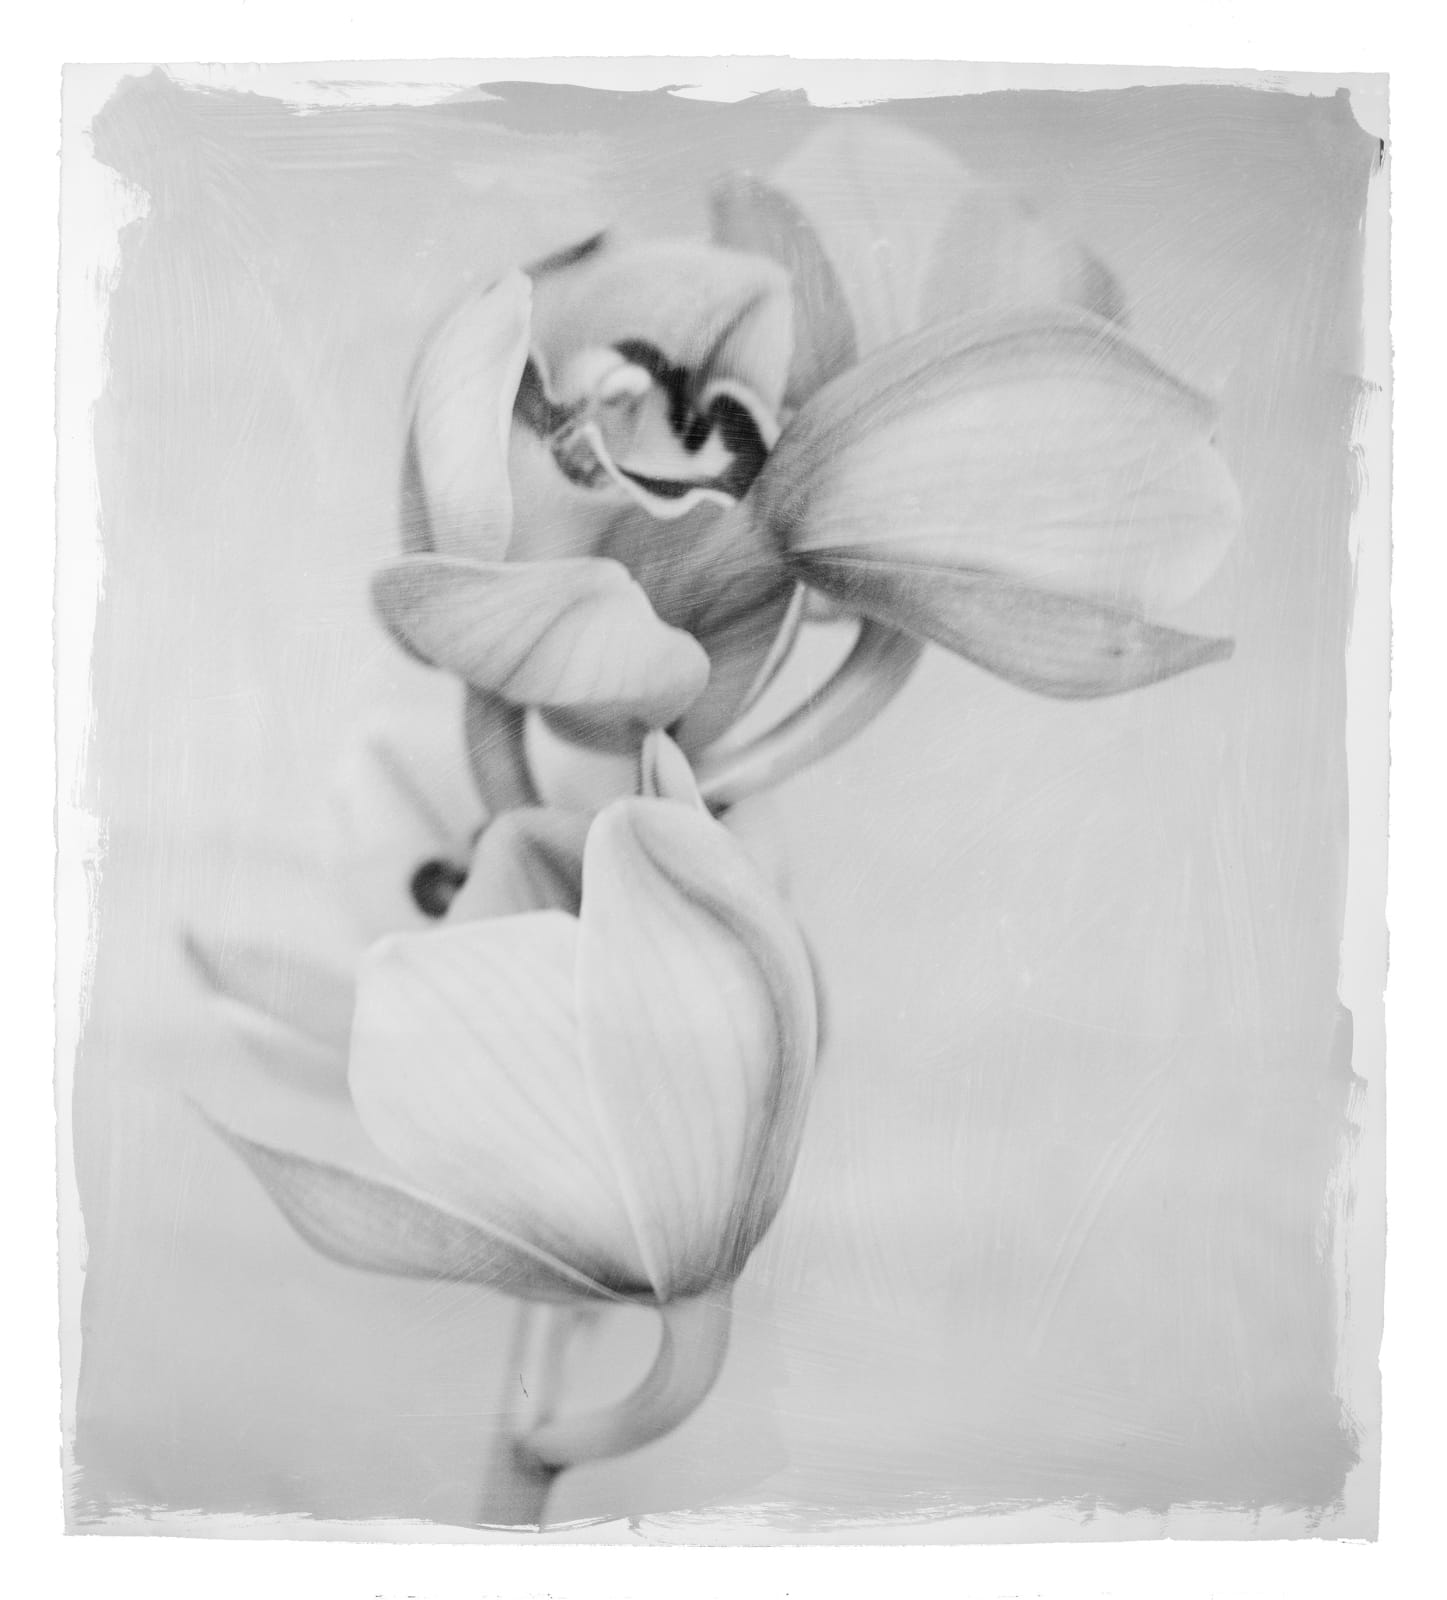 Stephen Inggs, Orchid, 2022